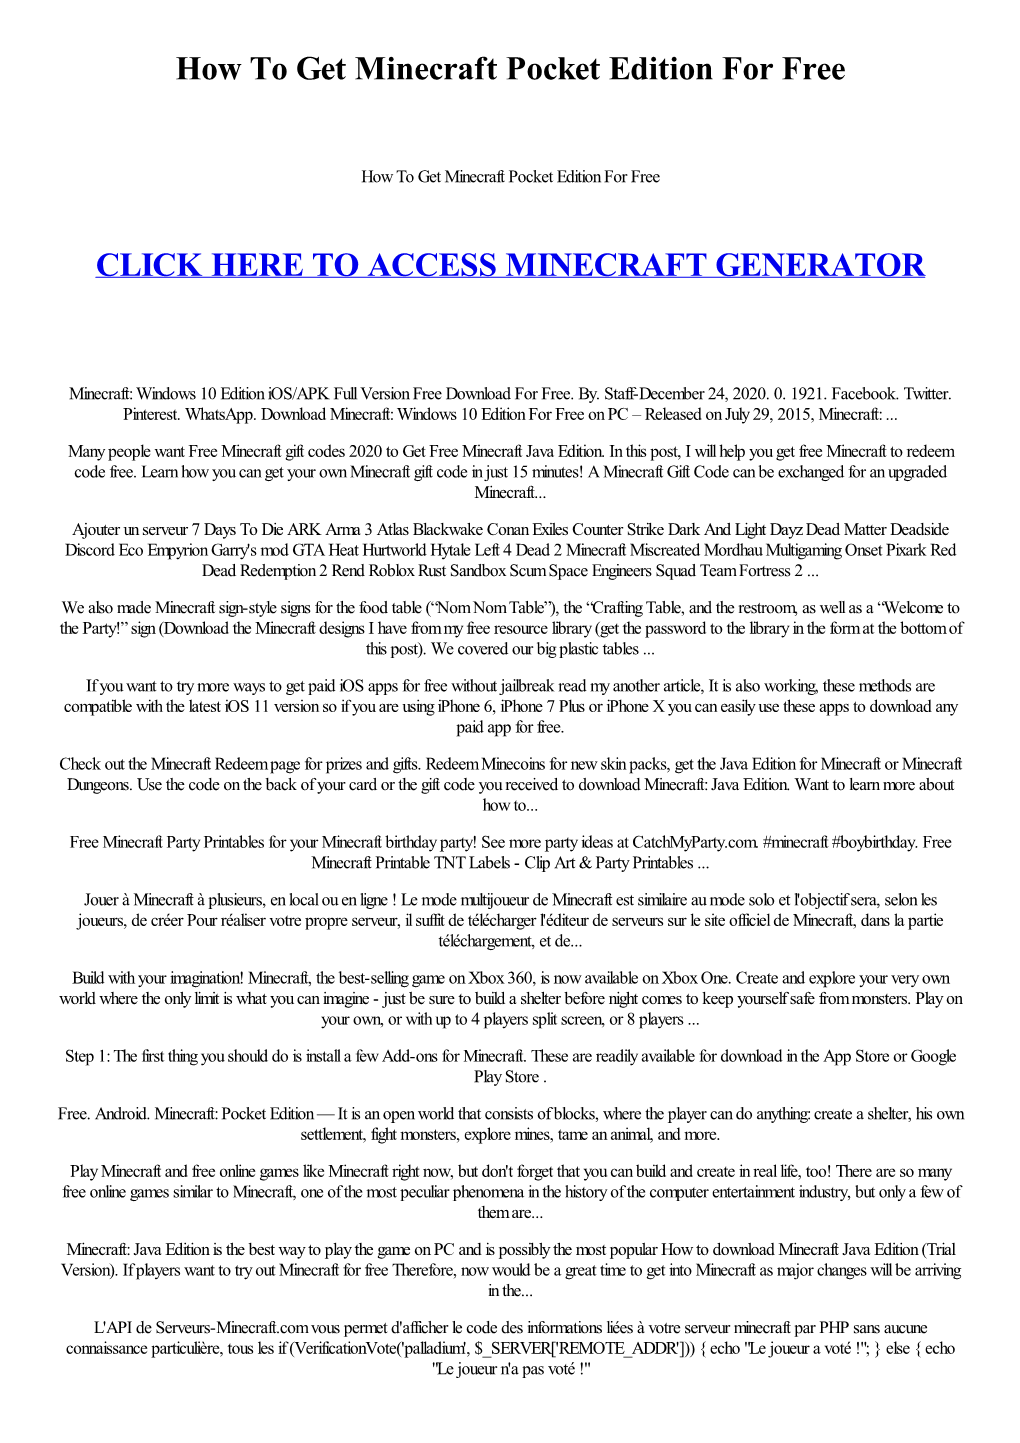 How to Get Minecraft Pocket Edition for Free